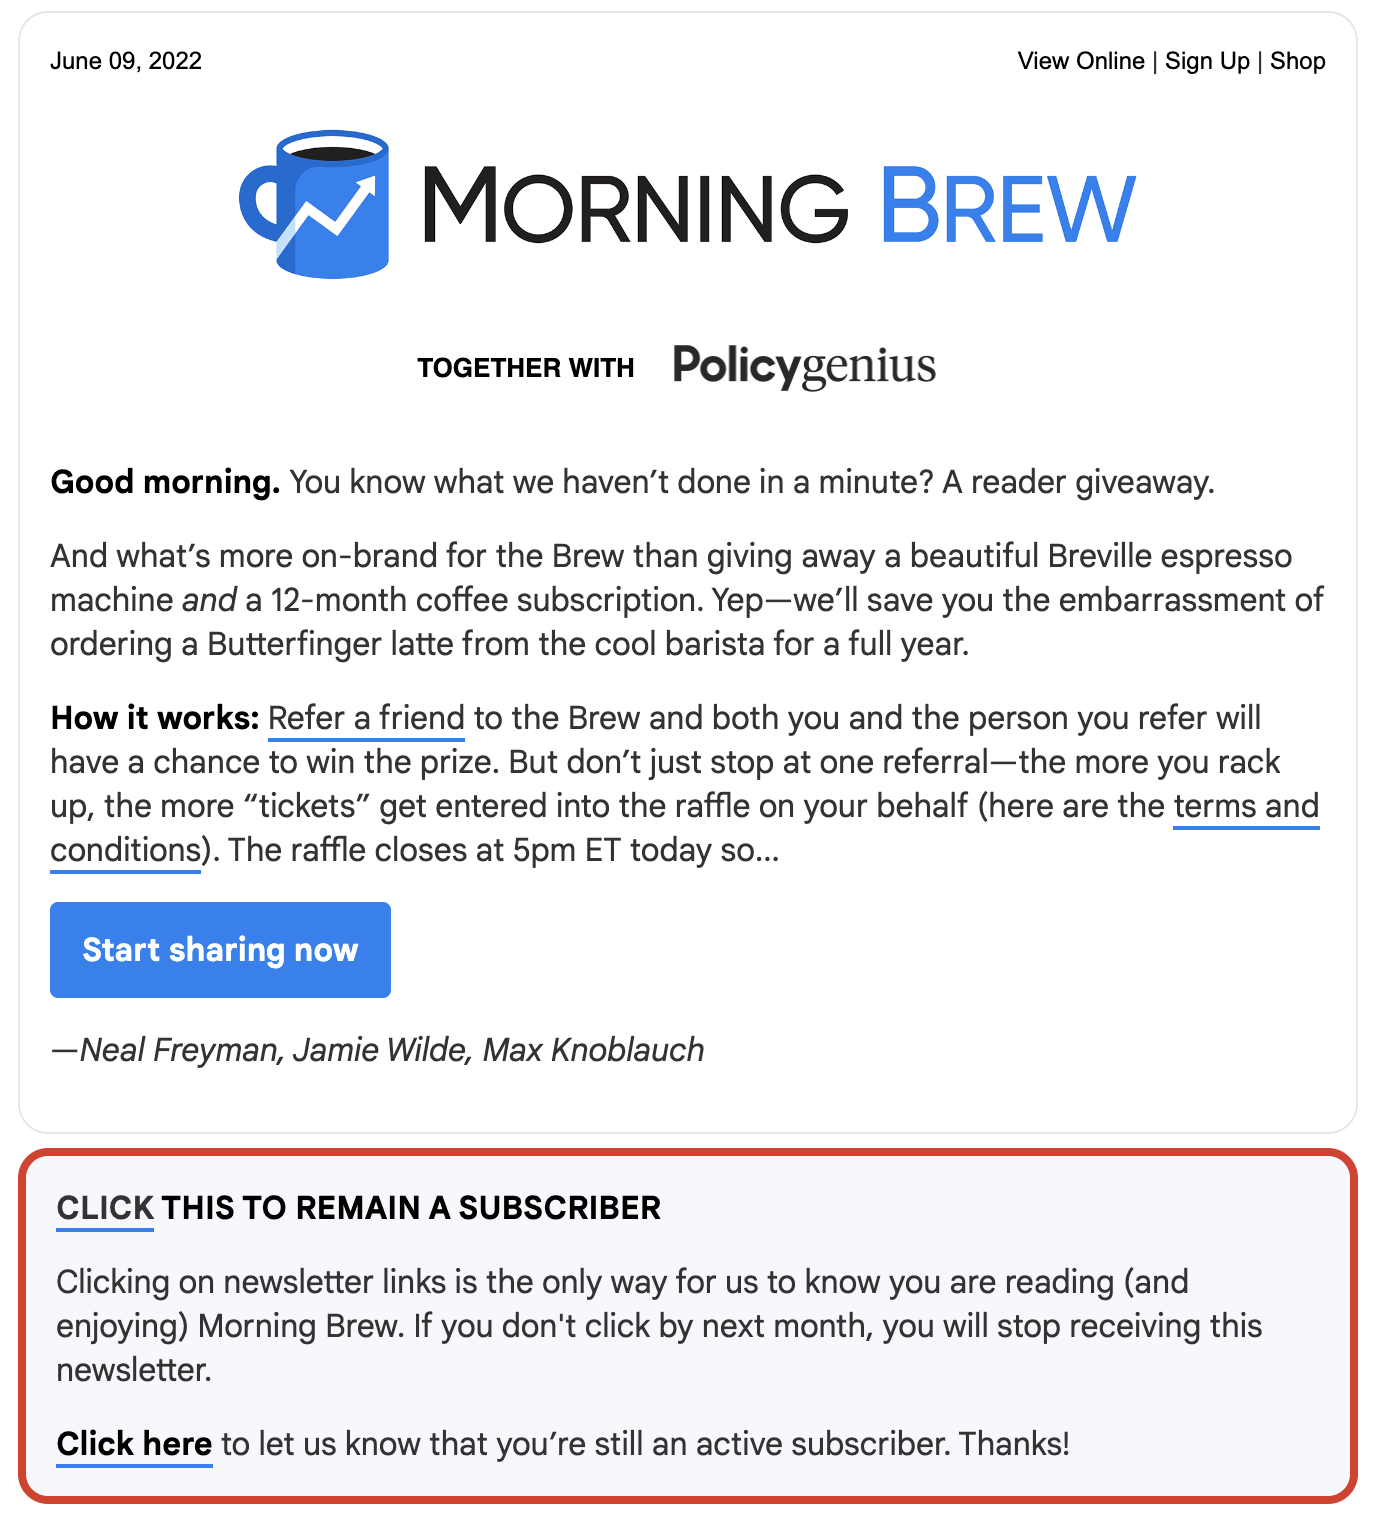 Subscription re-confirmation example from Morning Brew